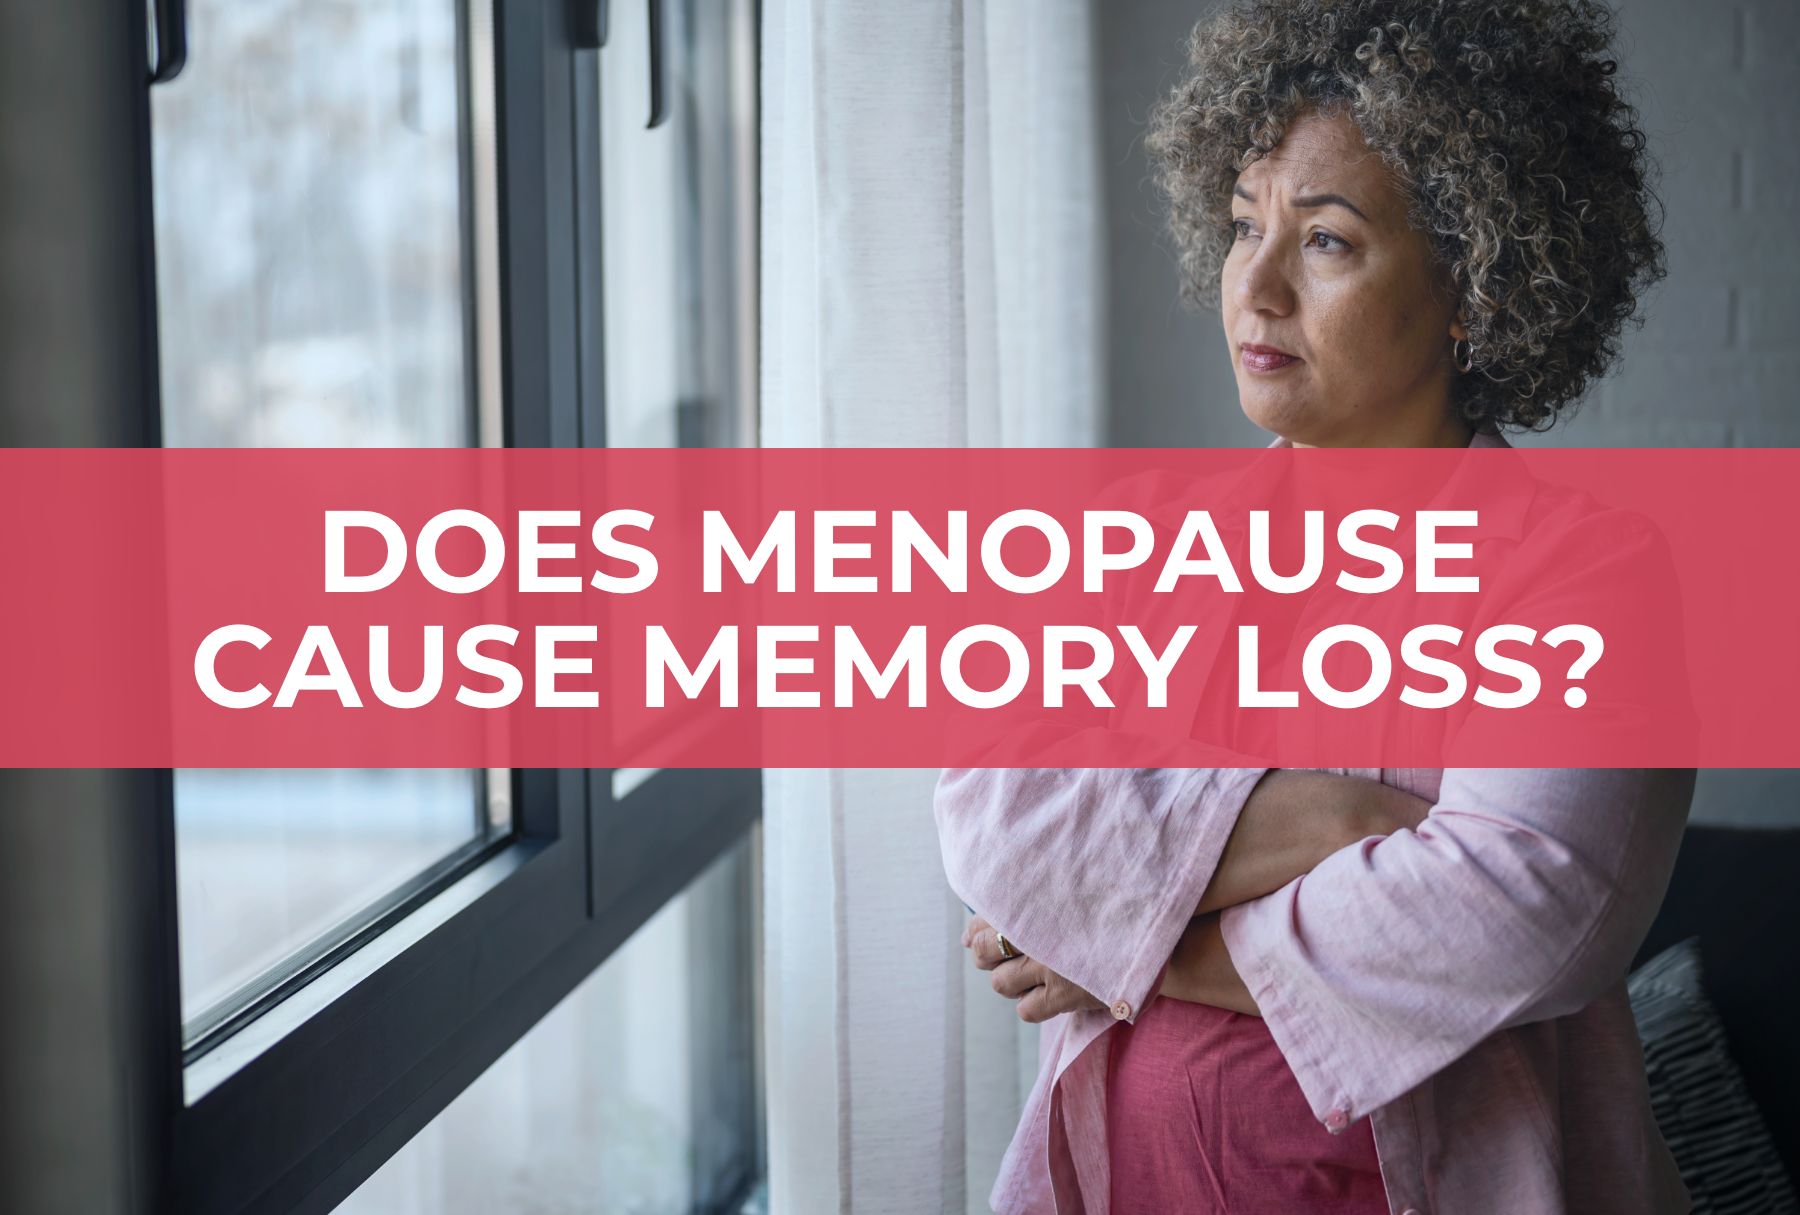 Does Menopause Cause Memory Loss?